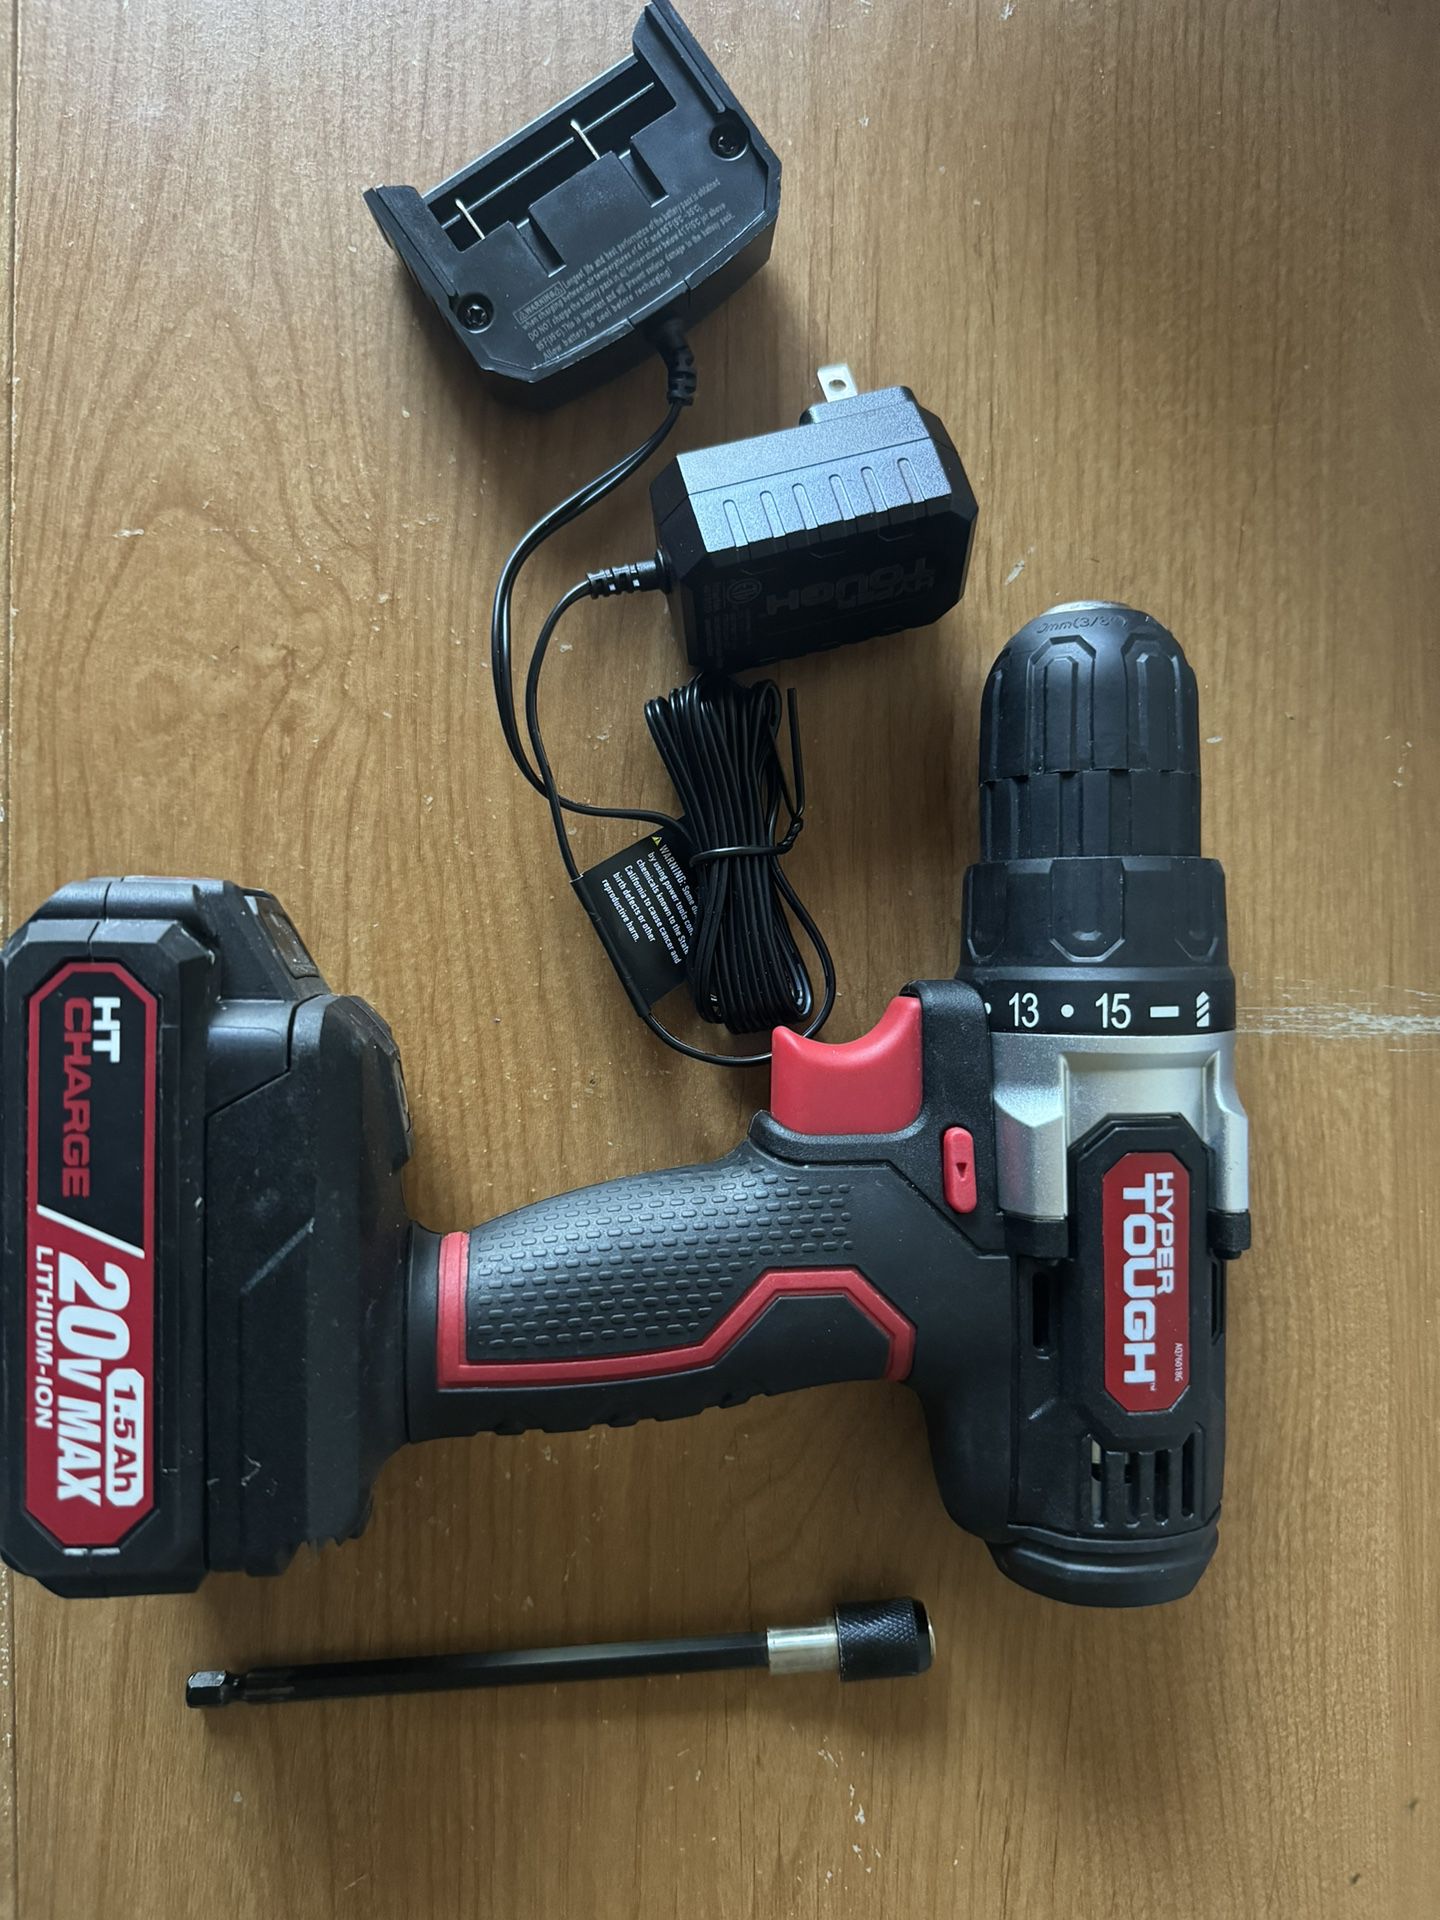 Hyper tough 20V Drill Machine With 2 Speed